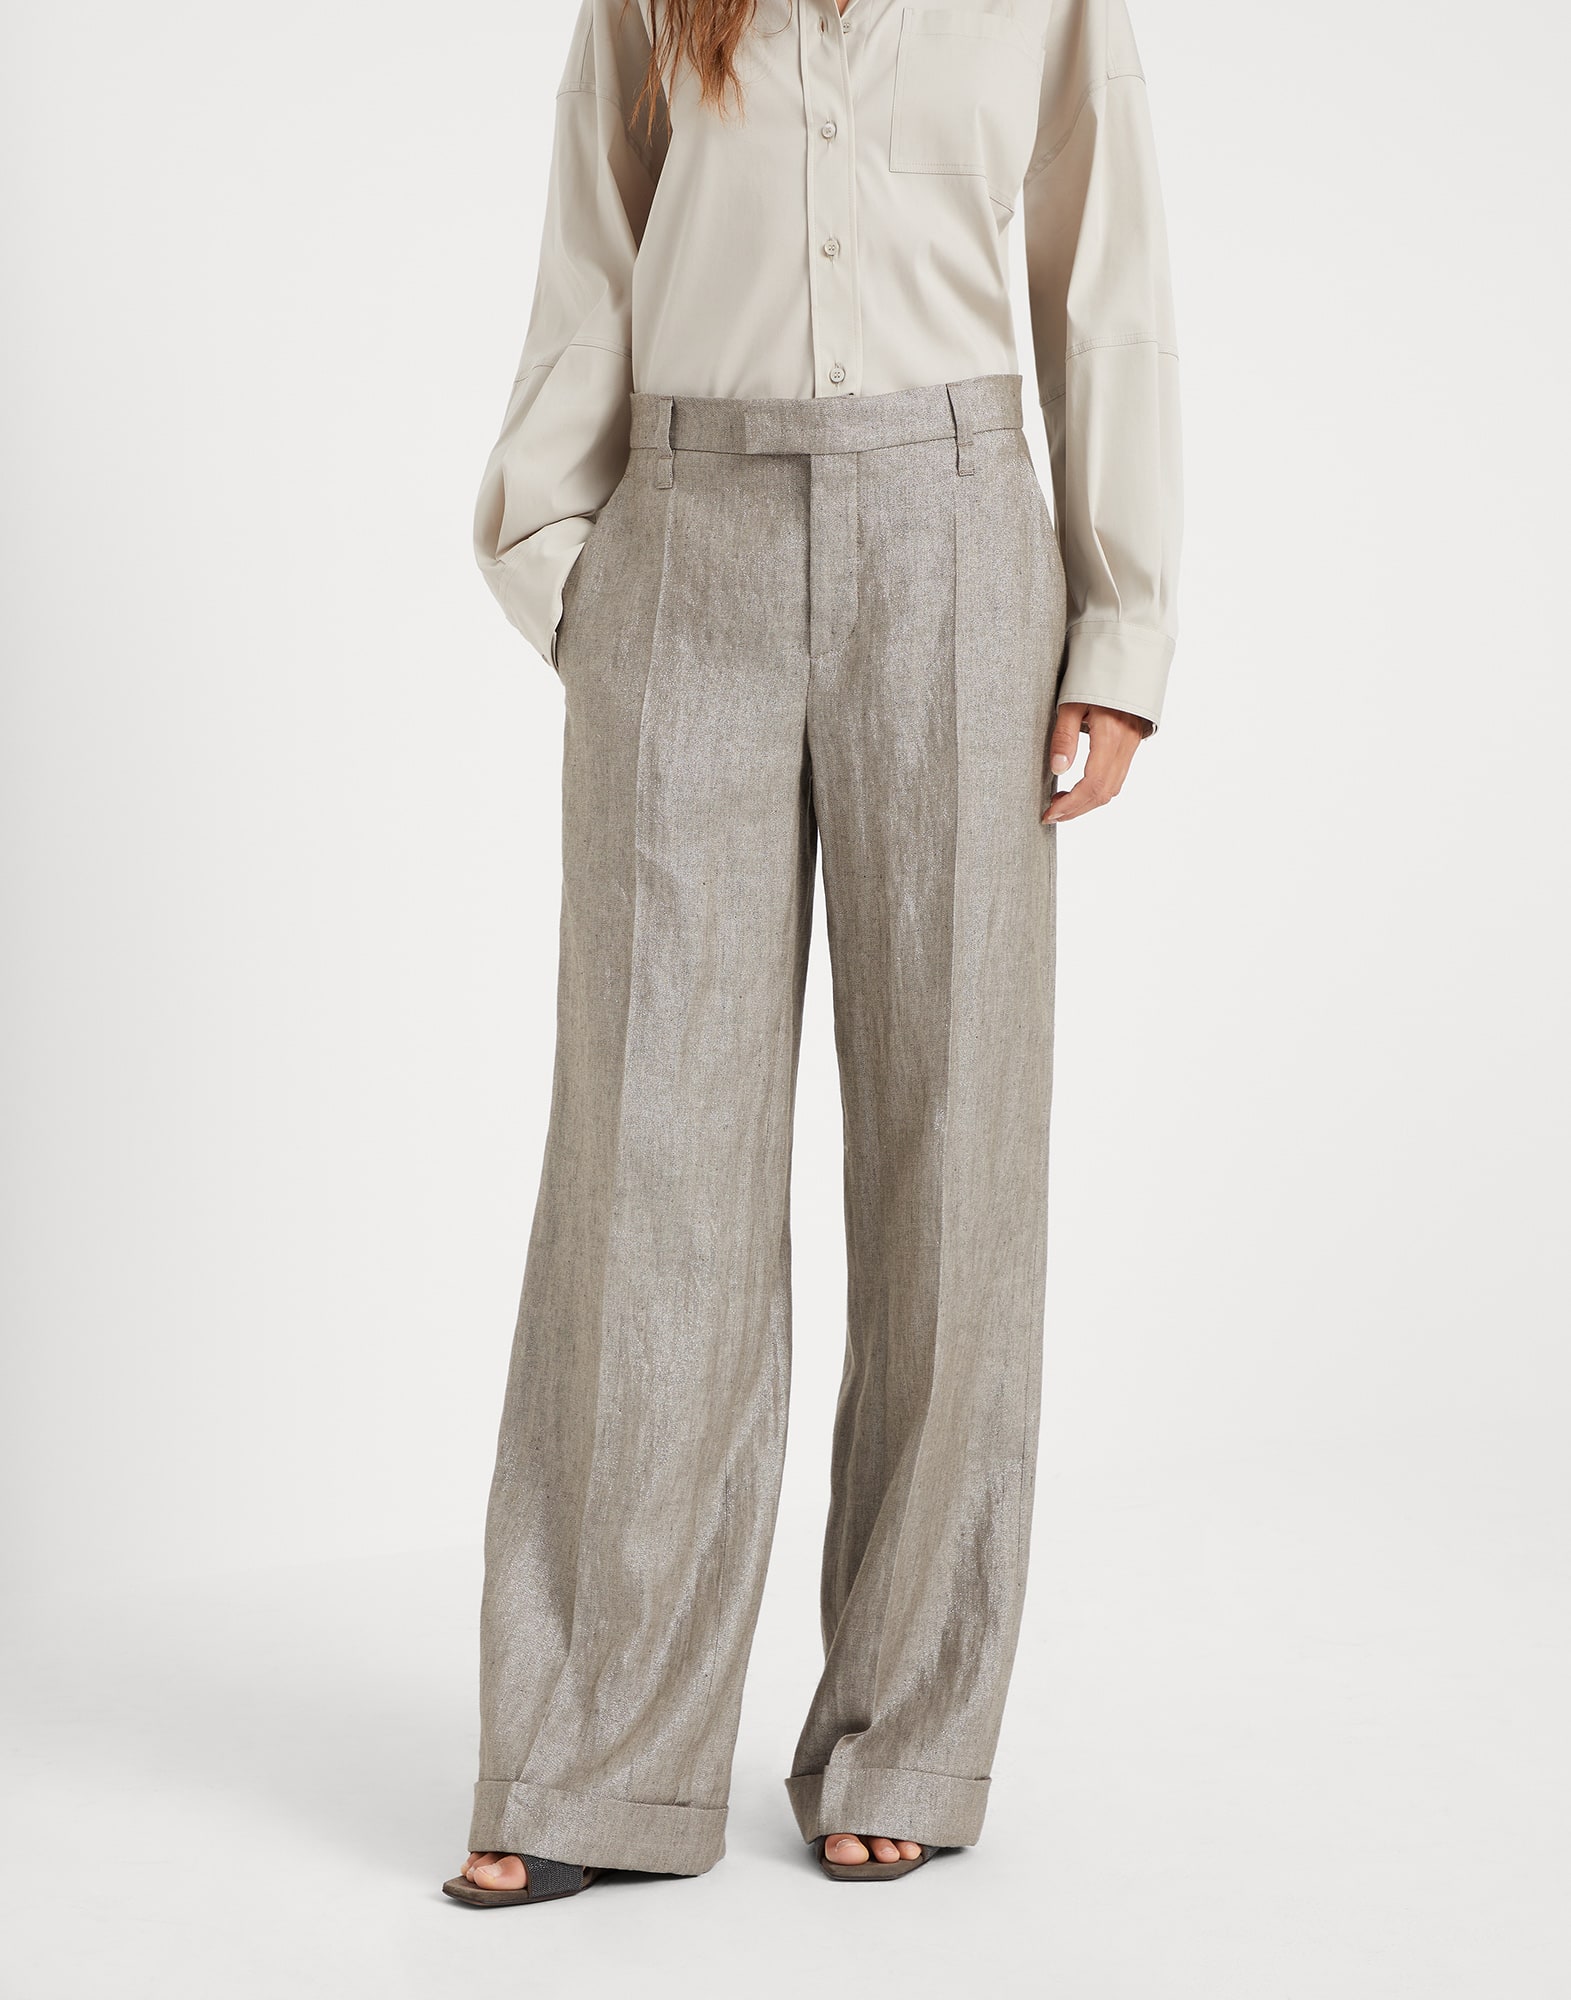 Loose Flared Trousers Brown Woman -
                        Brunello Cucinelli
                    